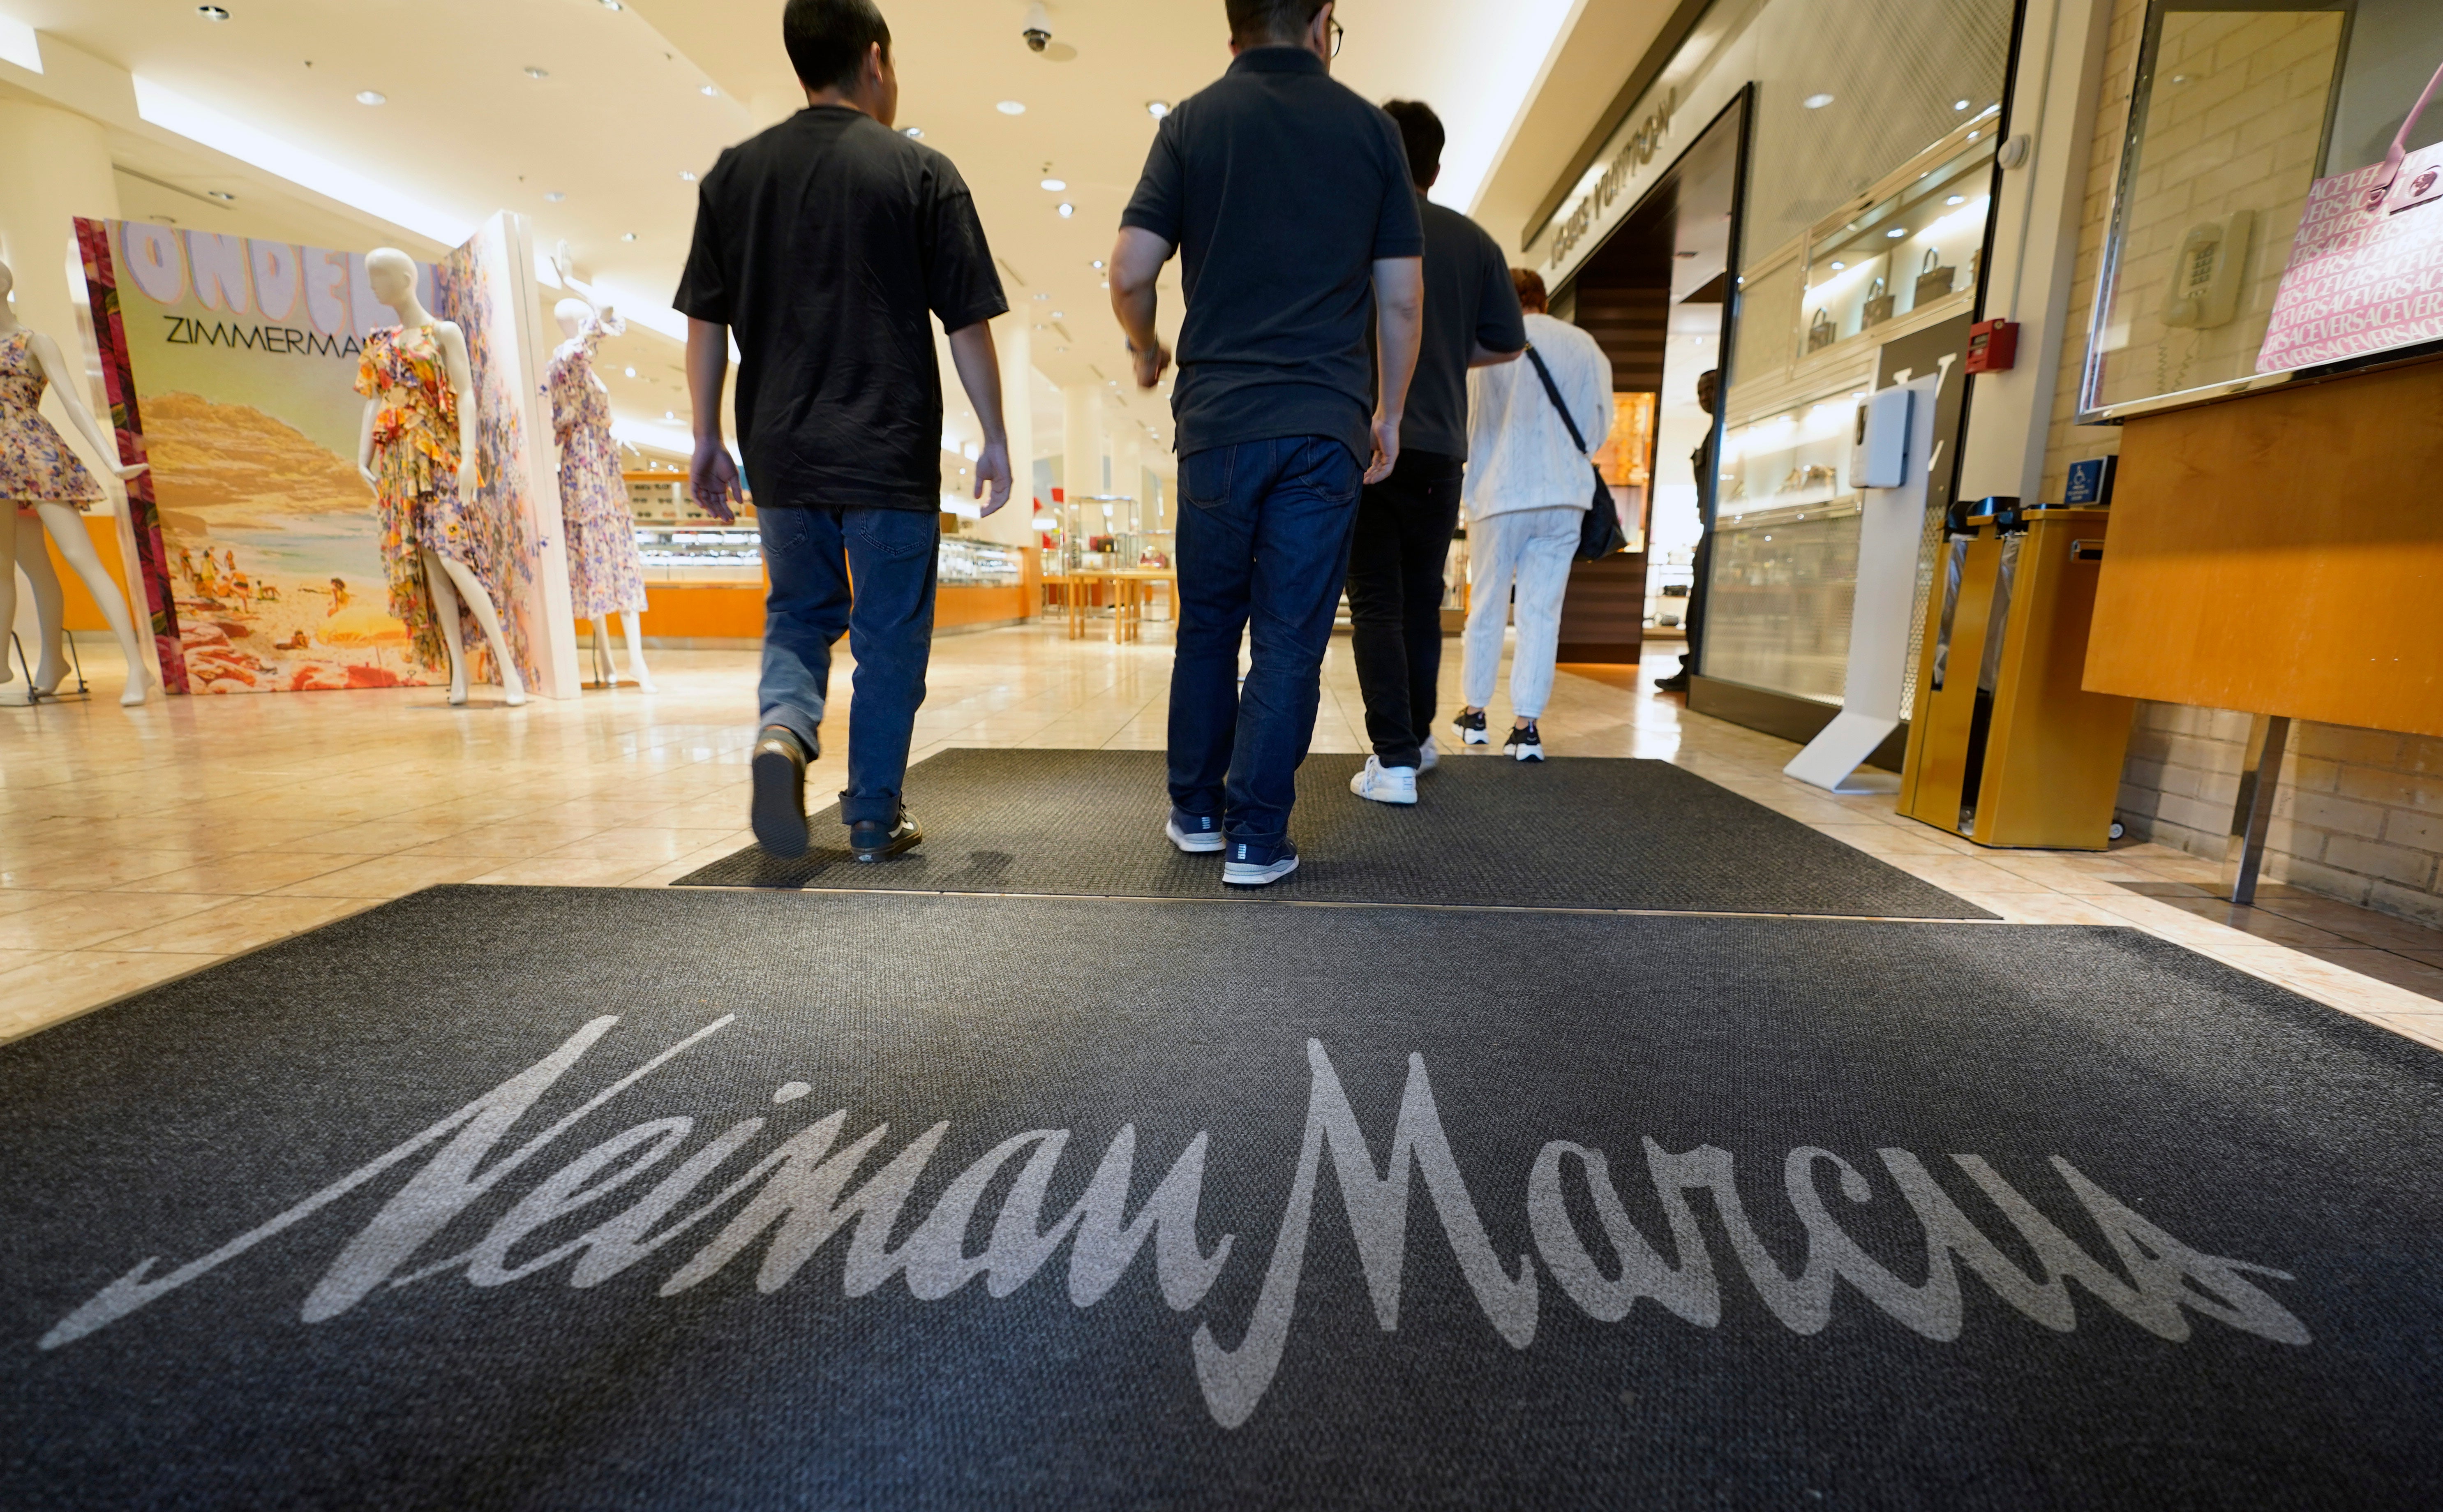 Neiman Marcus filed for bankruptcy protection in 2020